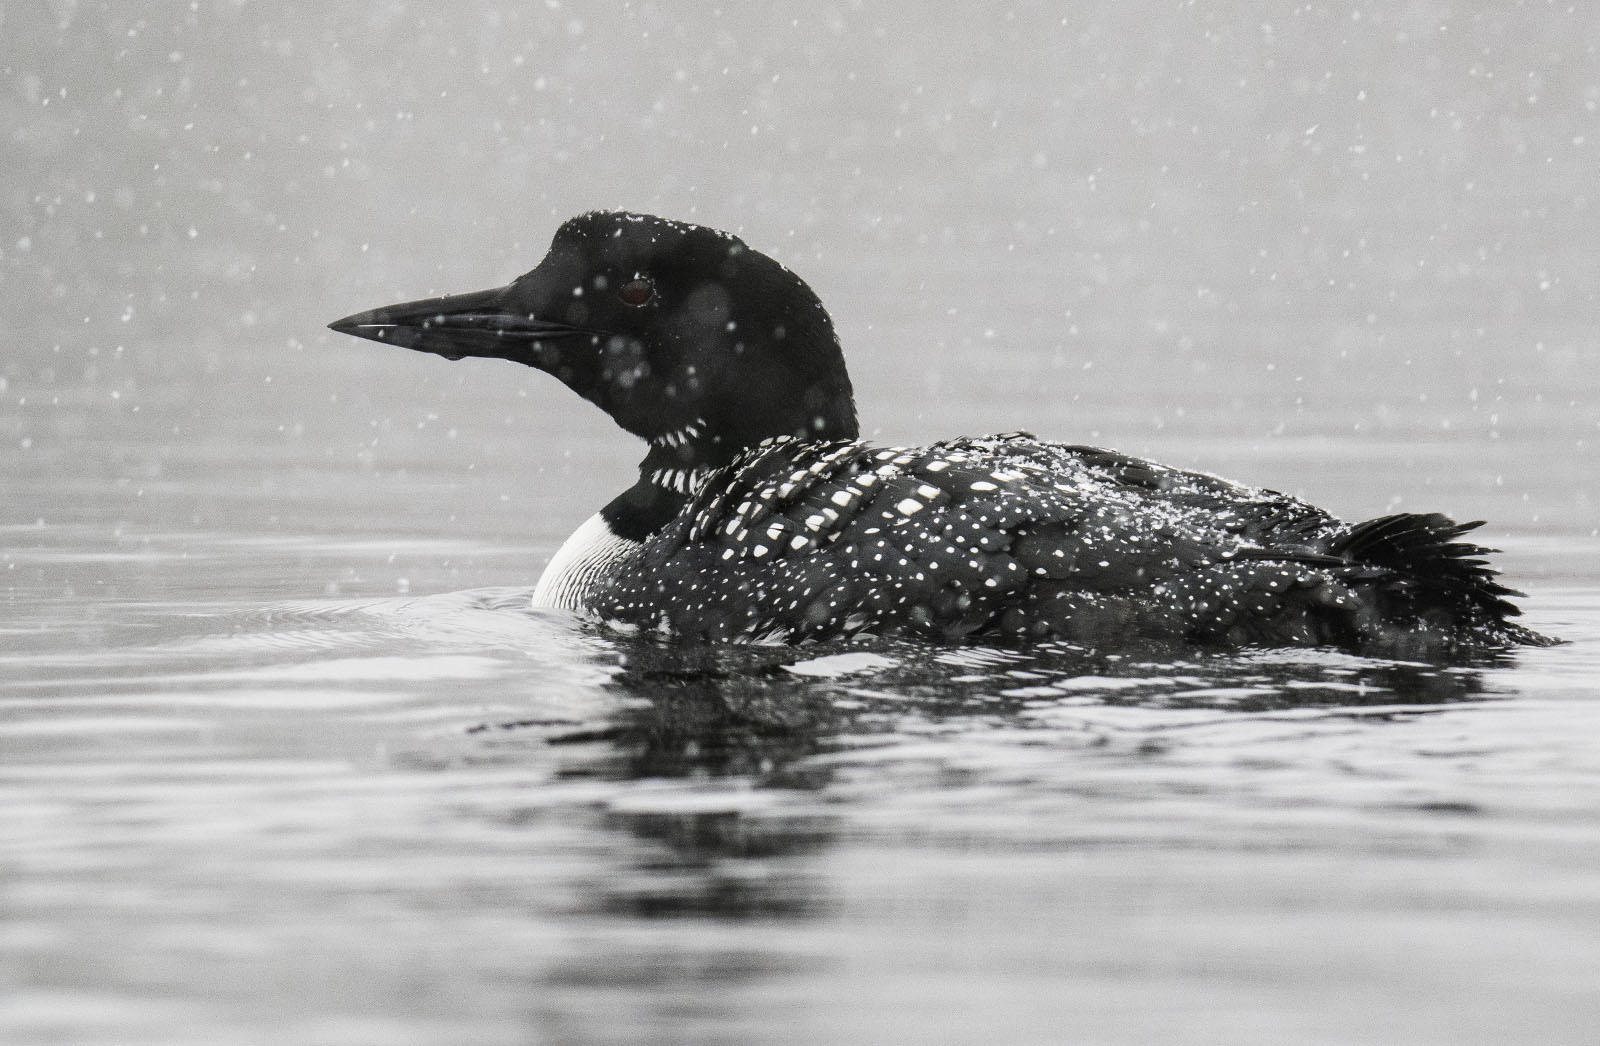 A common loon with striking black and white plumage floats on a serene water surface under gentle snowfall.